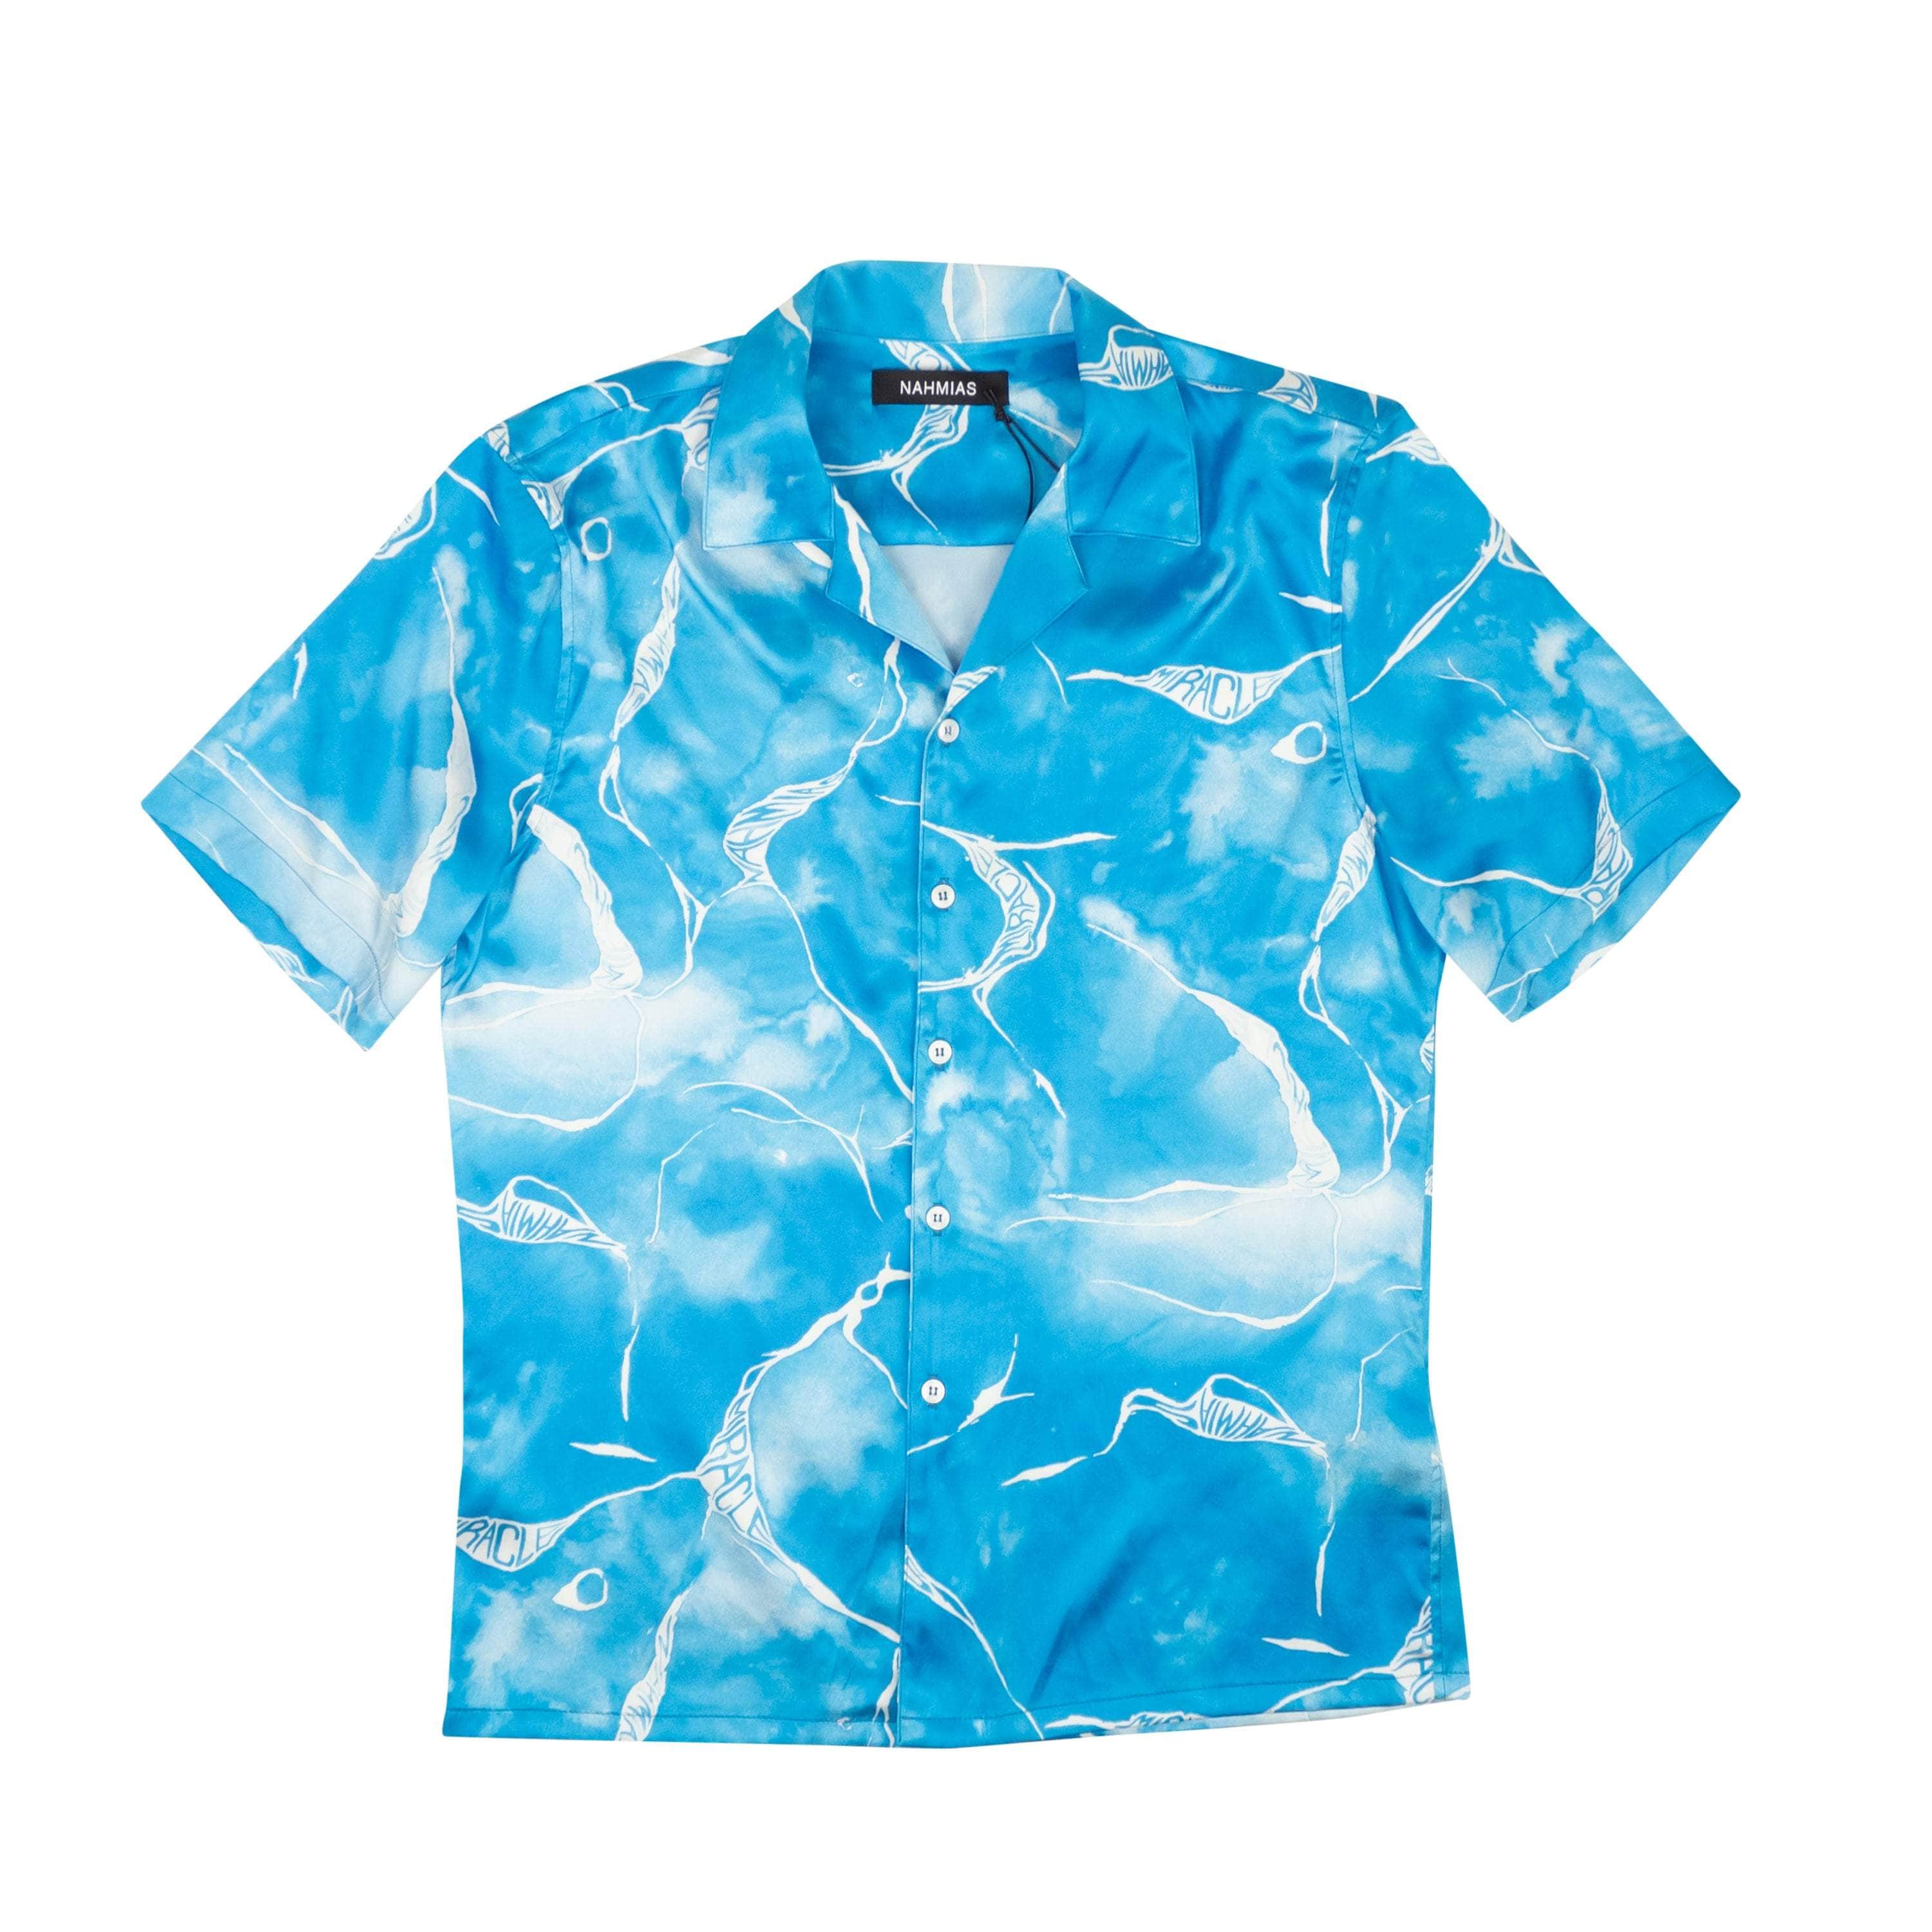 Nahmias 250-500, channelenable-all, chicmi, couponcollection, gender-mens, main-clothing, mens-shoes, nahmias, size-l, size-m, size-s, size-xl, size-xs, size-xxl Blue Miracle Tie Dye Silk Button Down Shirt